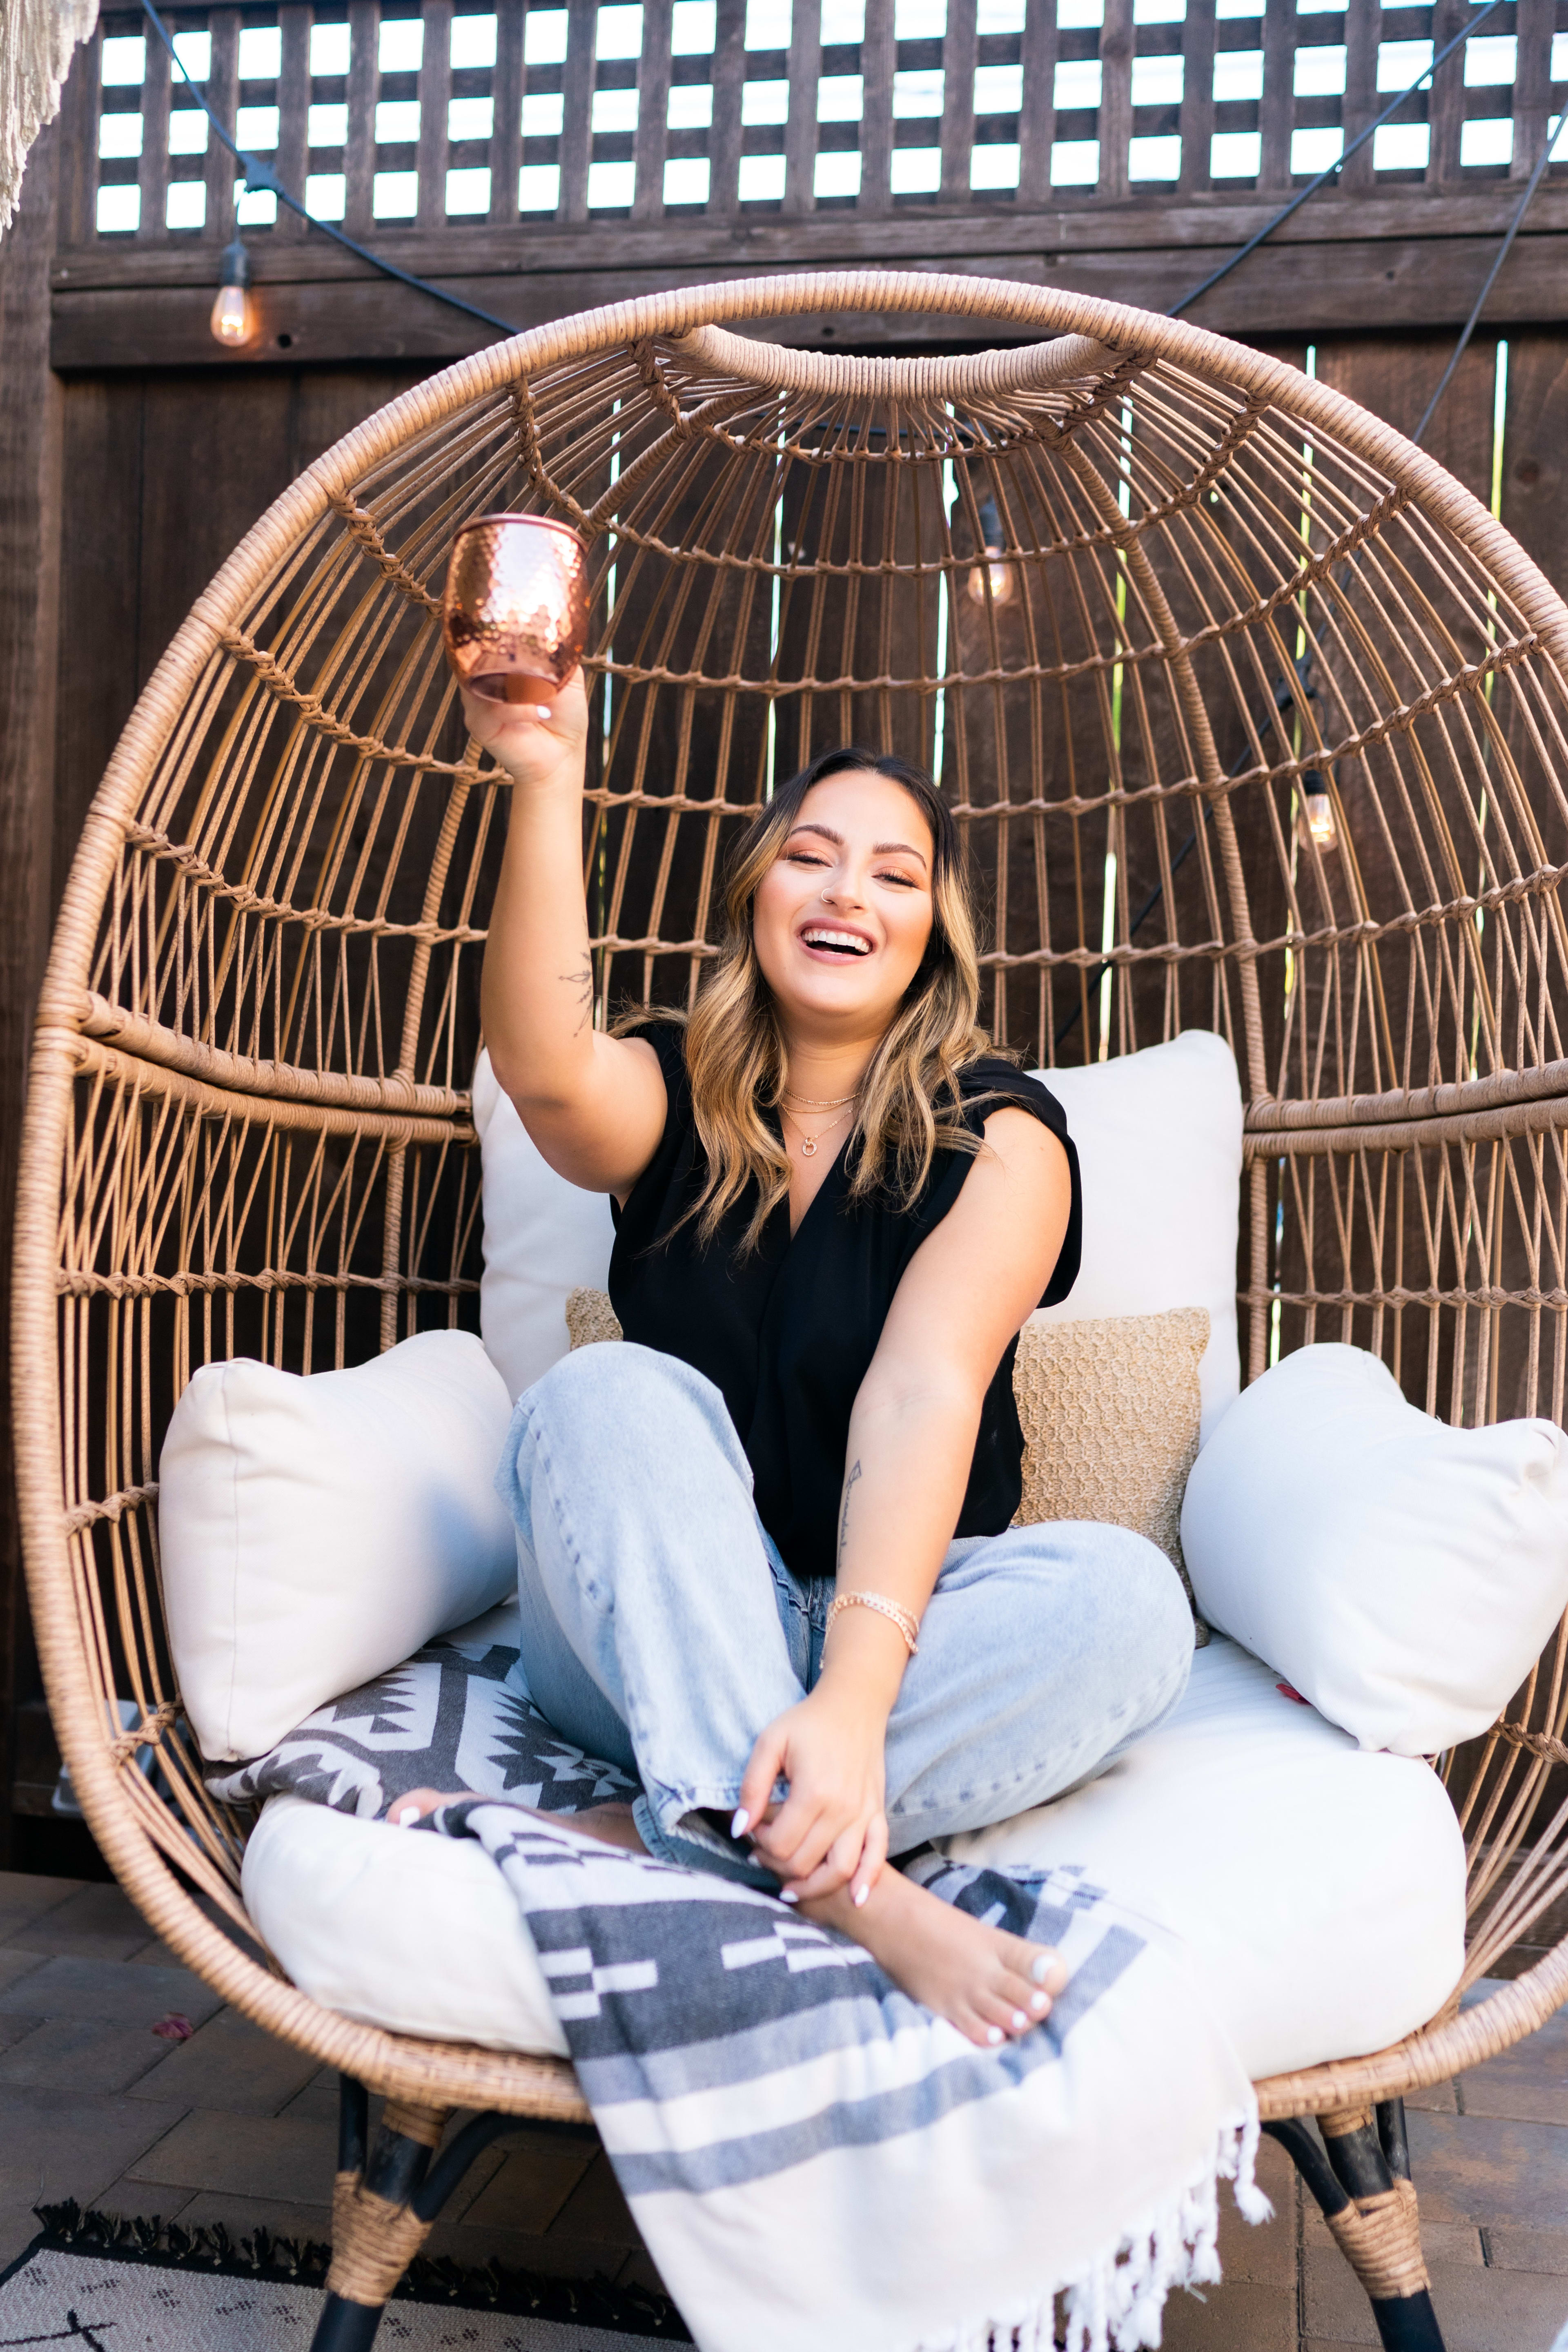 An outdoor photoshoot featuring a woman sitting in an egg chair holding a drink.